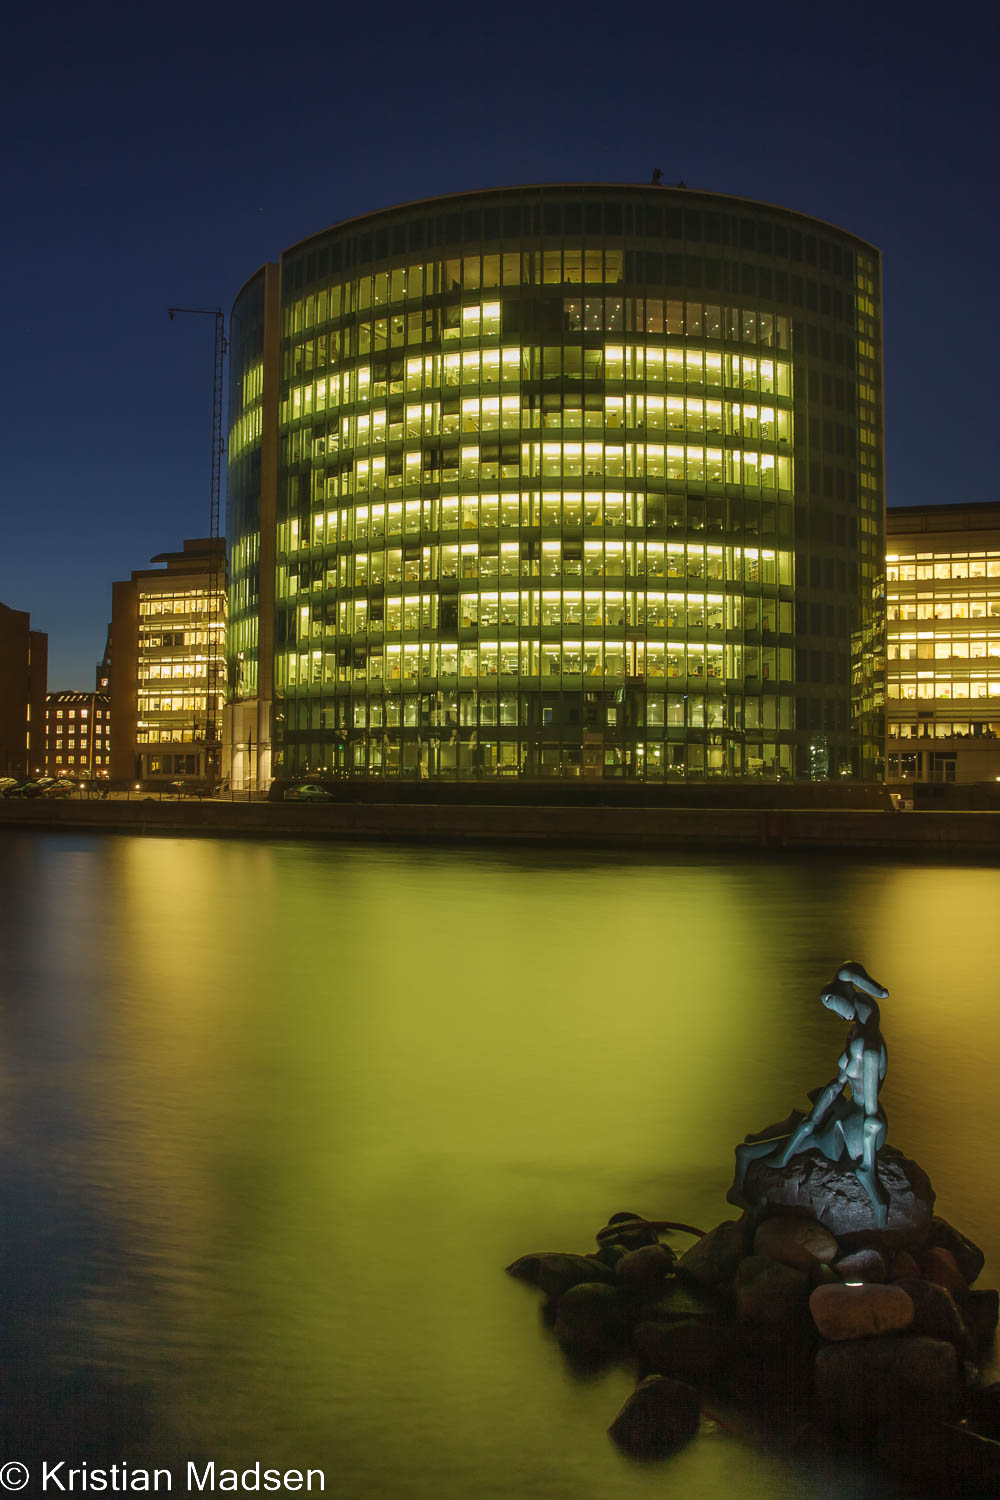 Office buildings & The genetically modified little mermaid